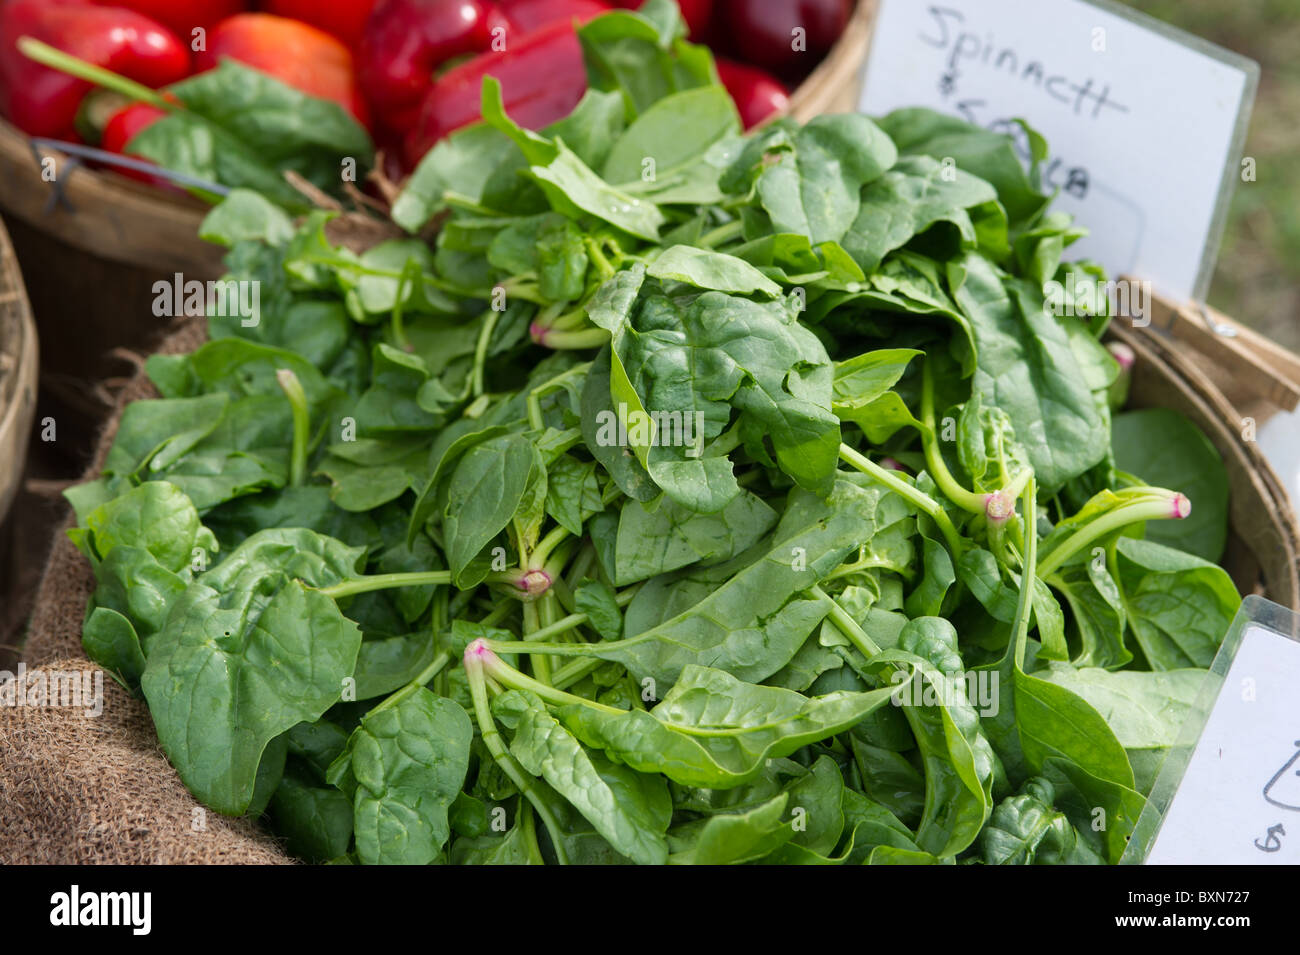 Spinach for sale at a farmers market Stock Photo